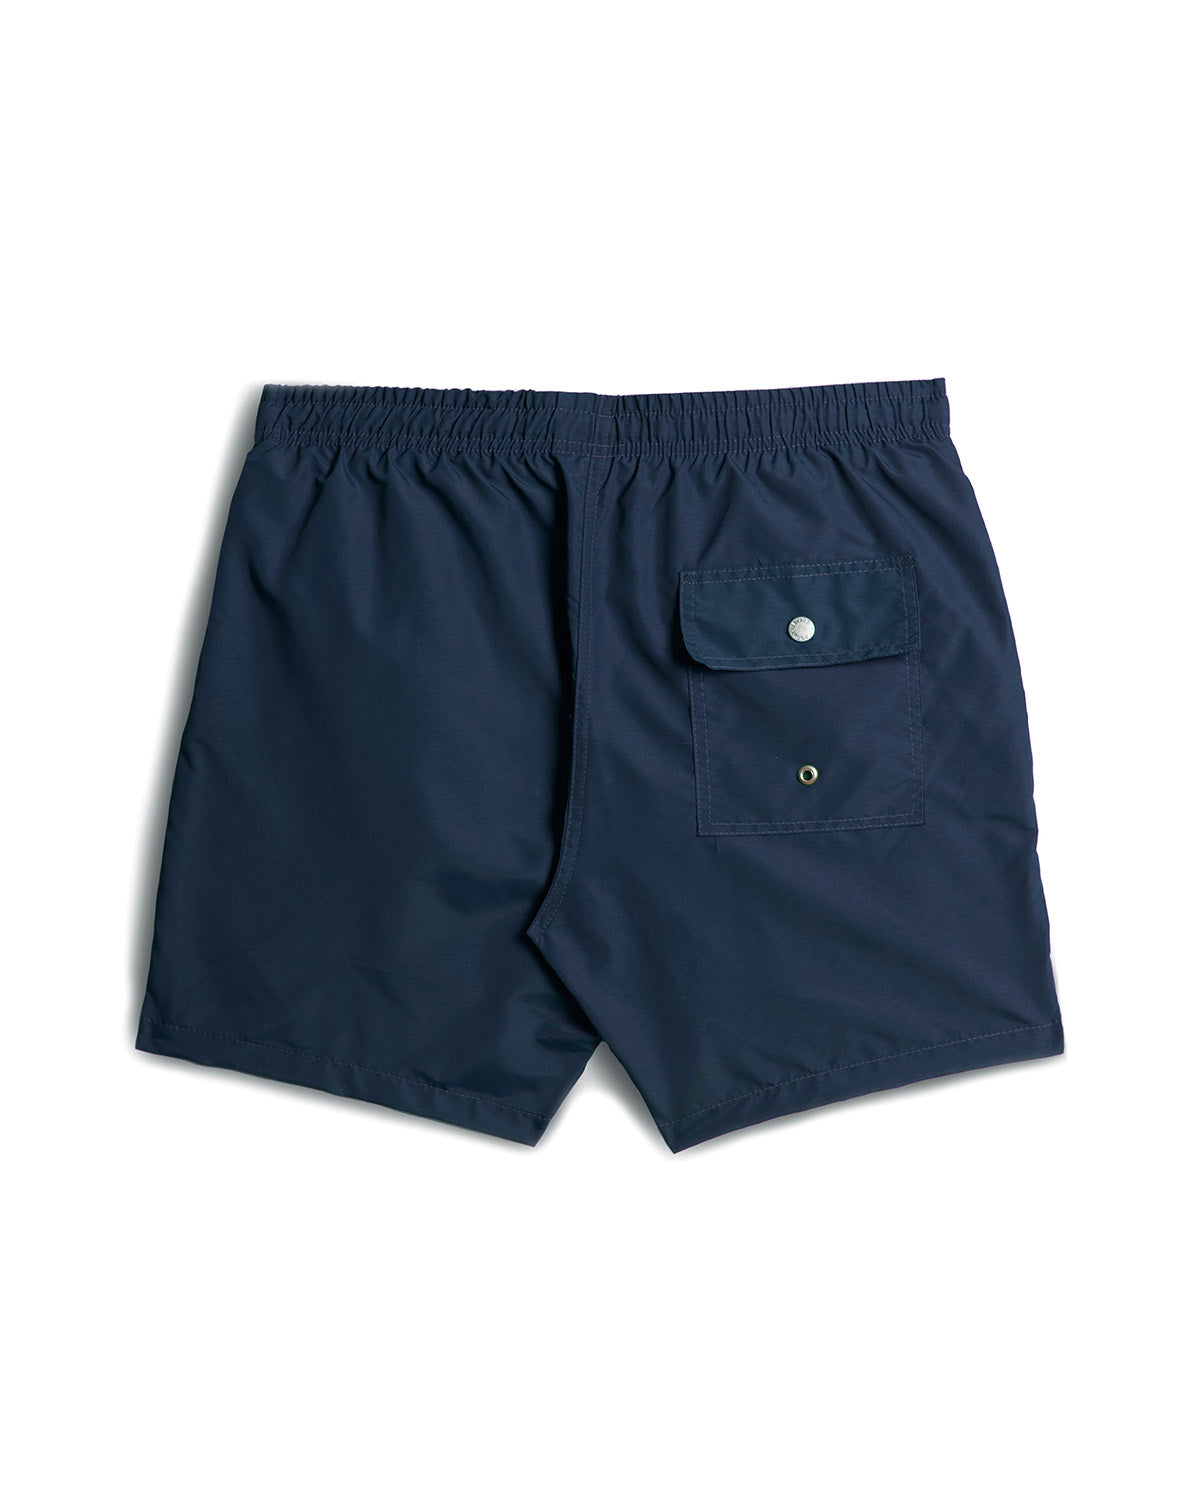 Back View of Solid Navy Bather Swim Trunk